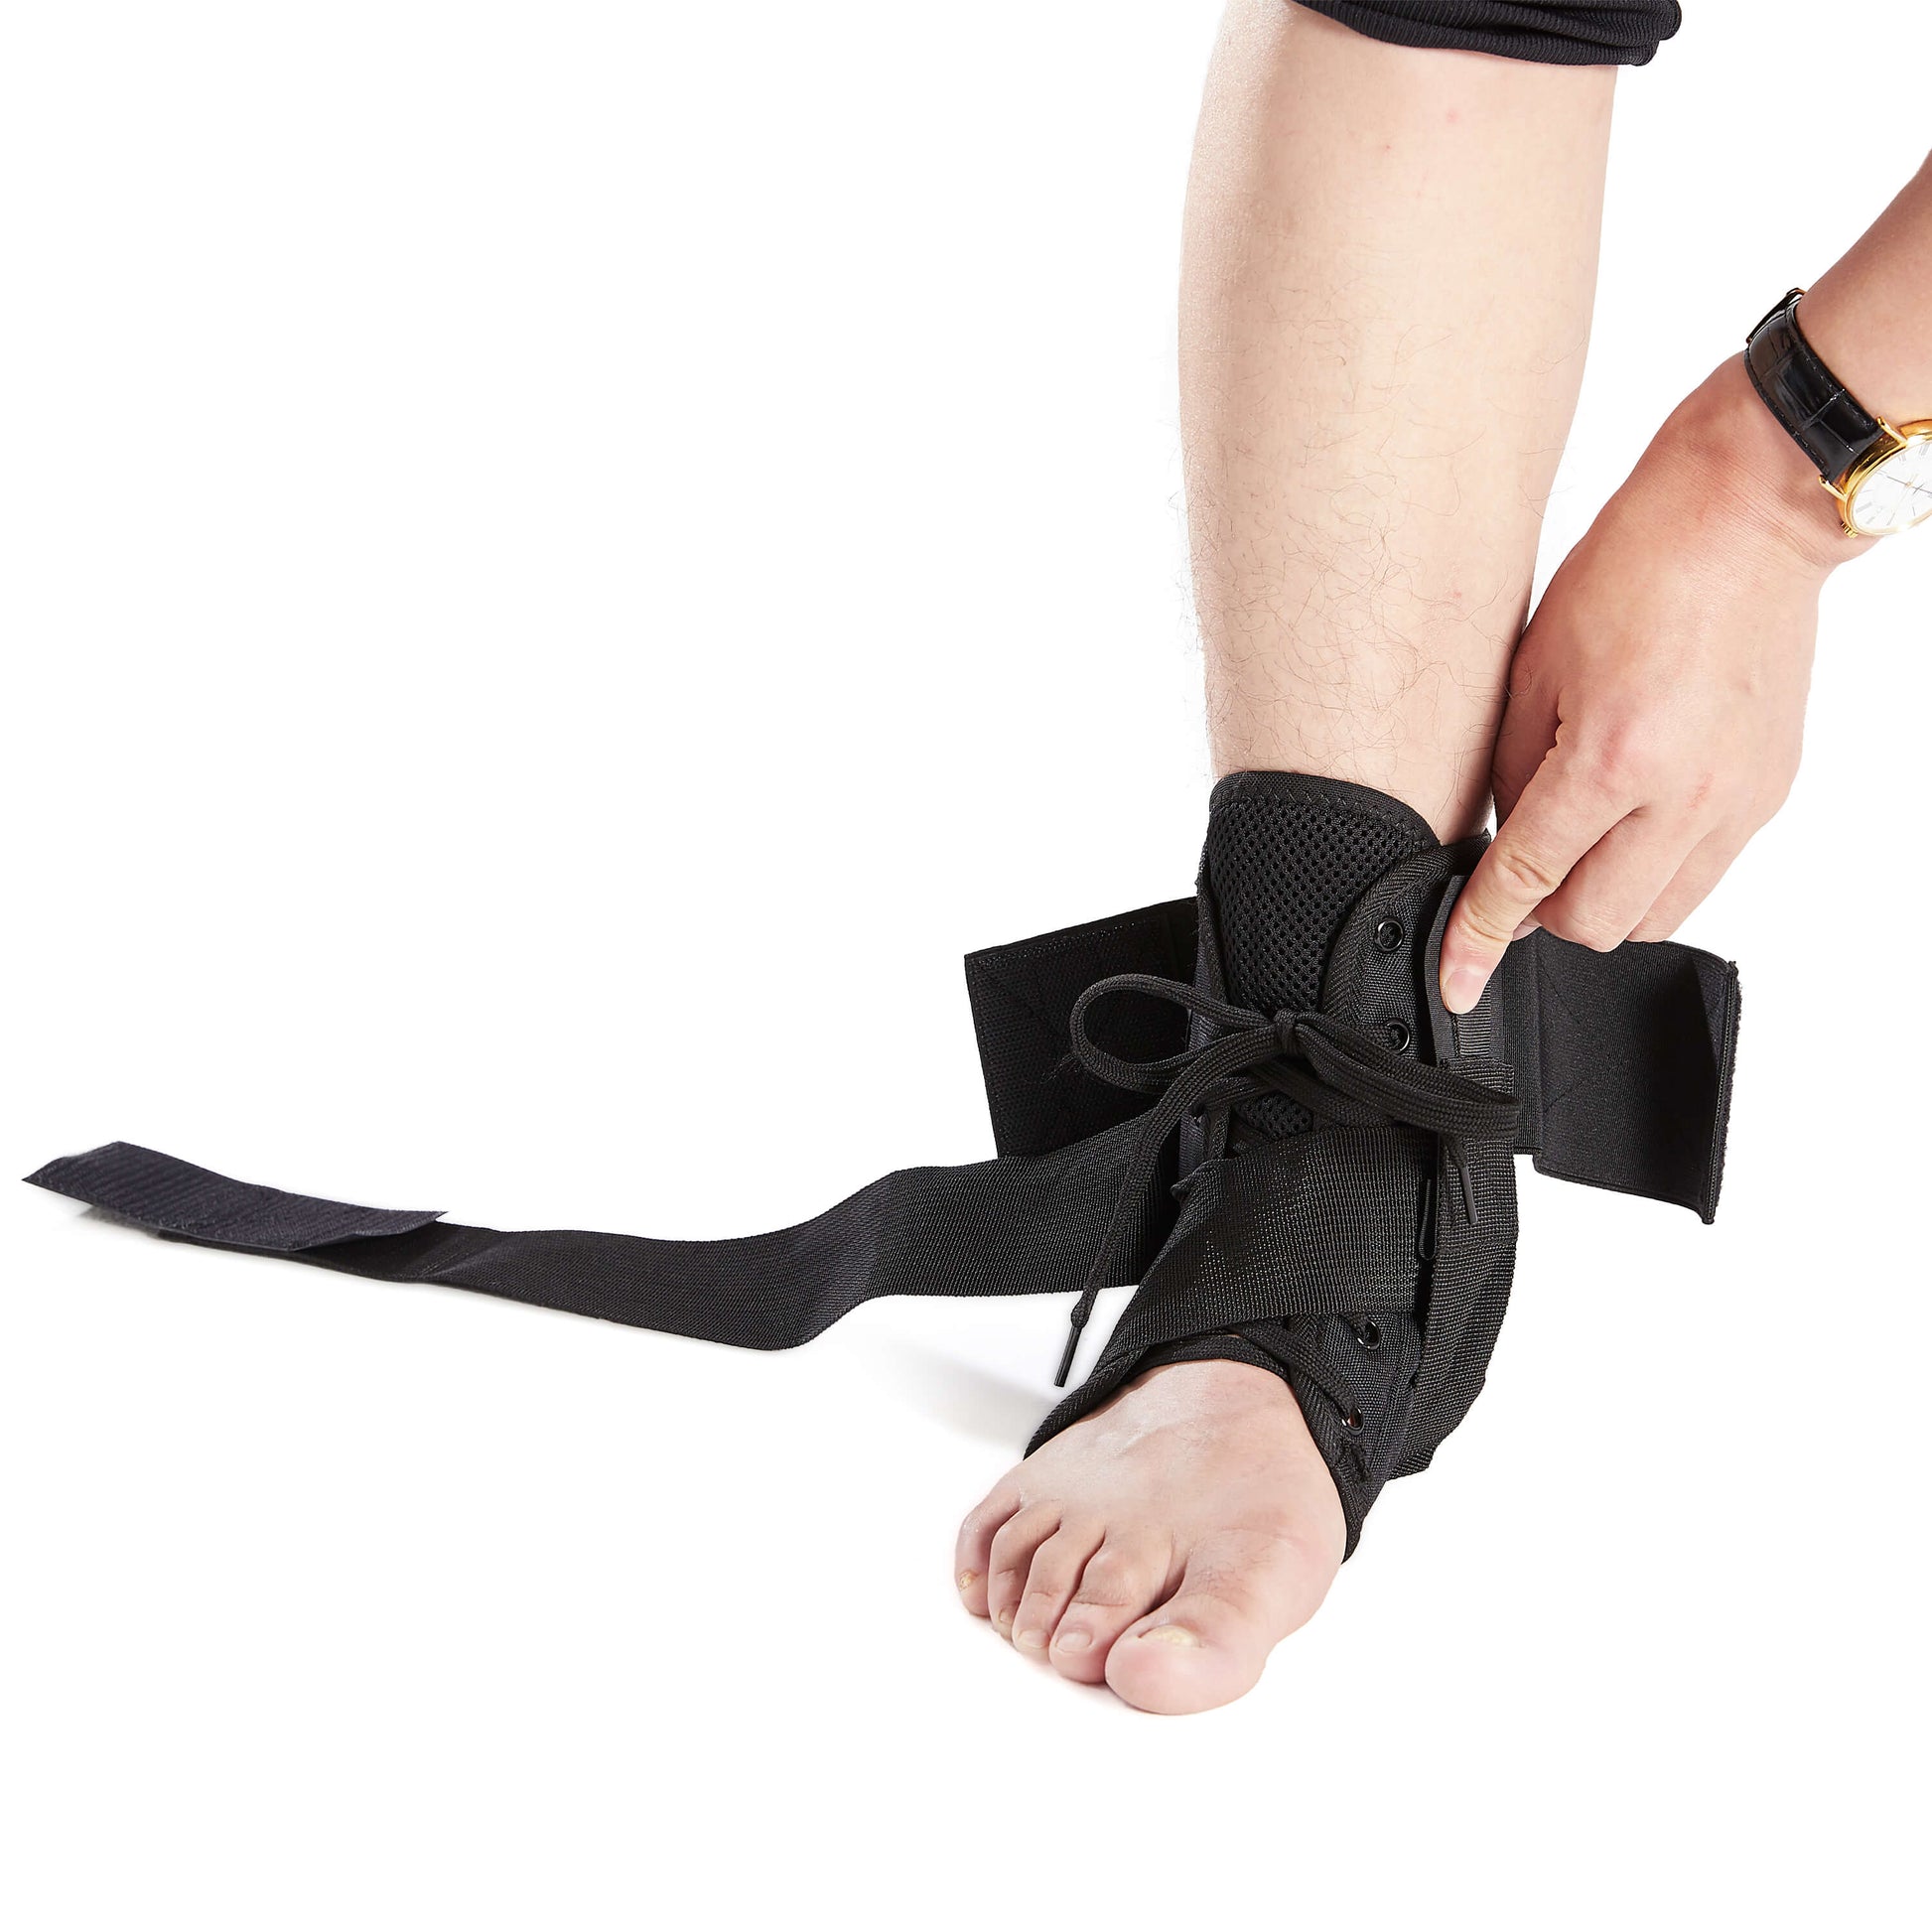 Lace Up Ankle Support Brace for Sprained Ankle and Tendonitis